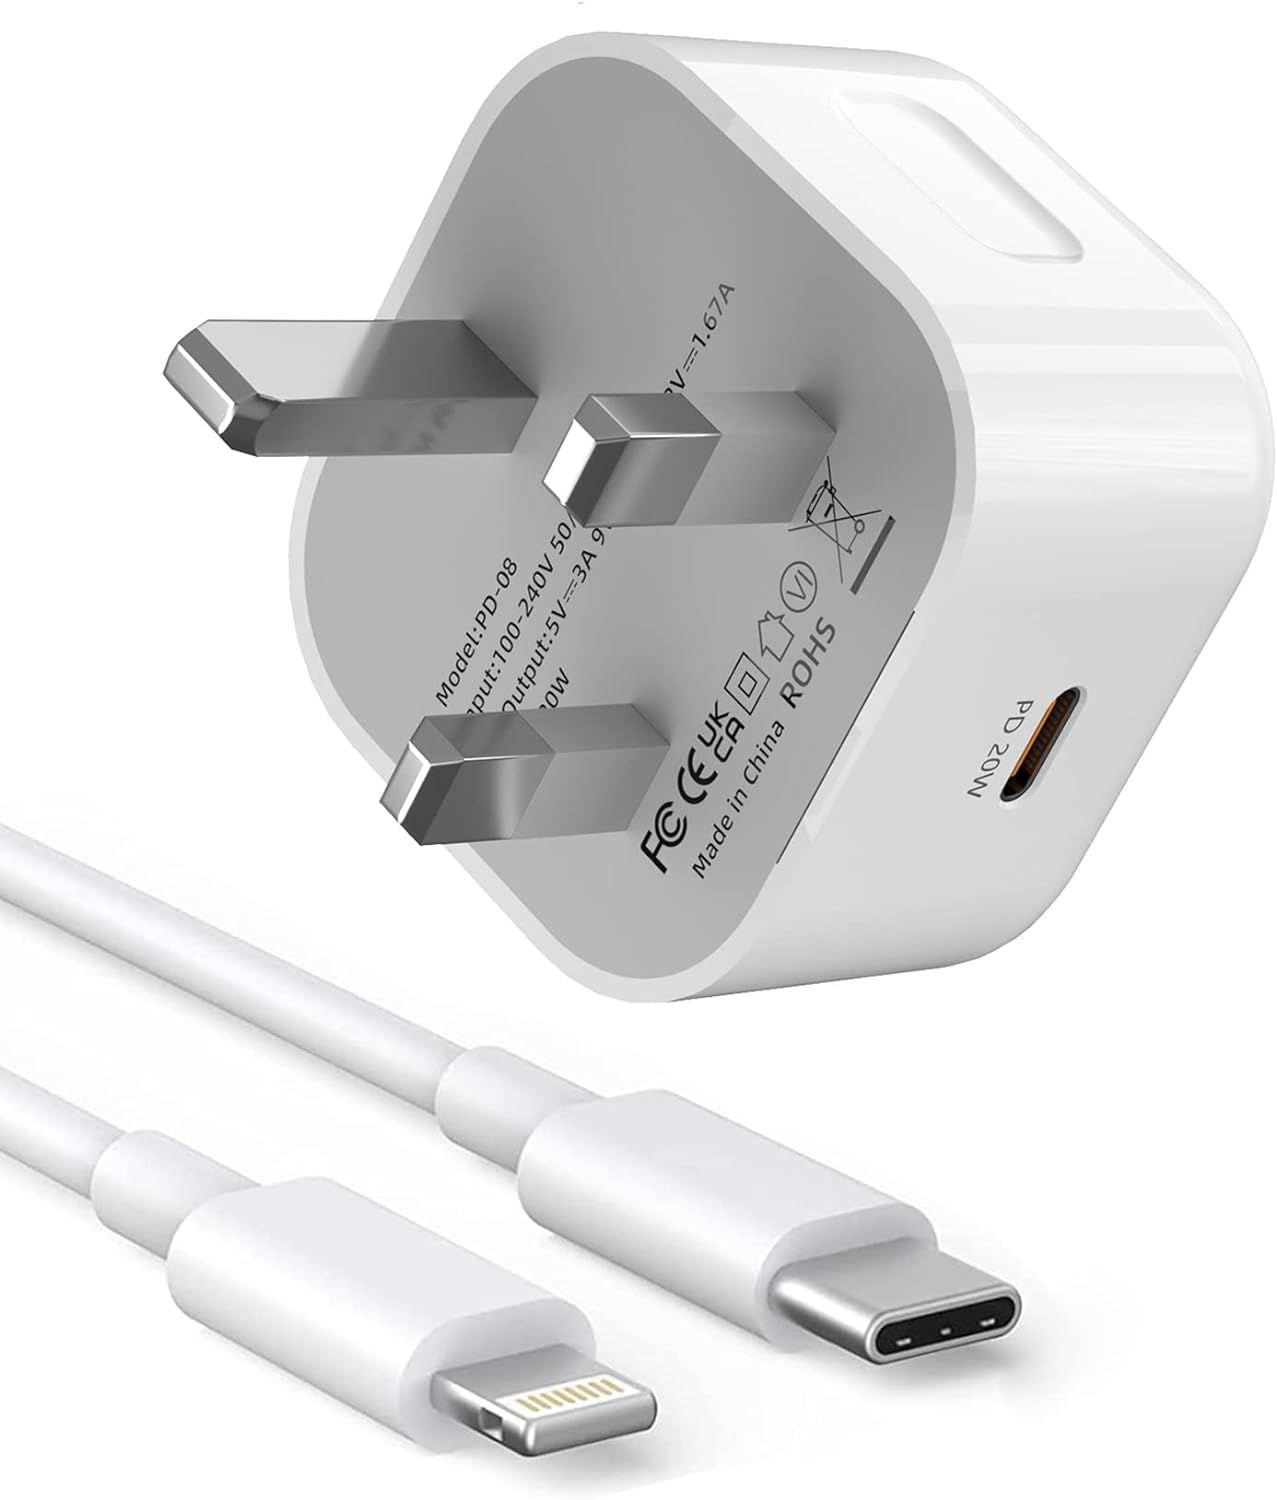 Buy Original 25w Type C 3pin iPhone Wall Charger with Cable at